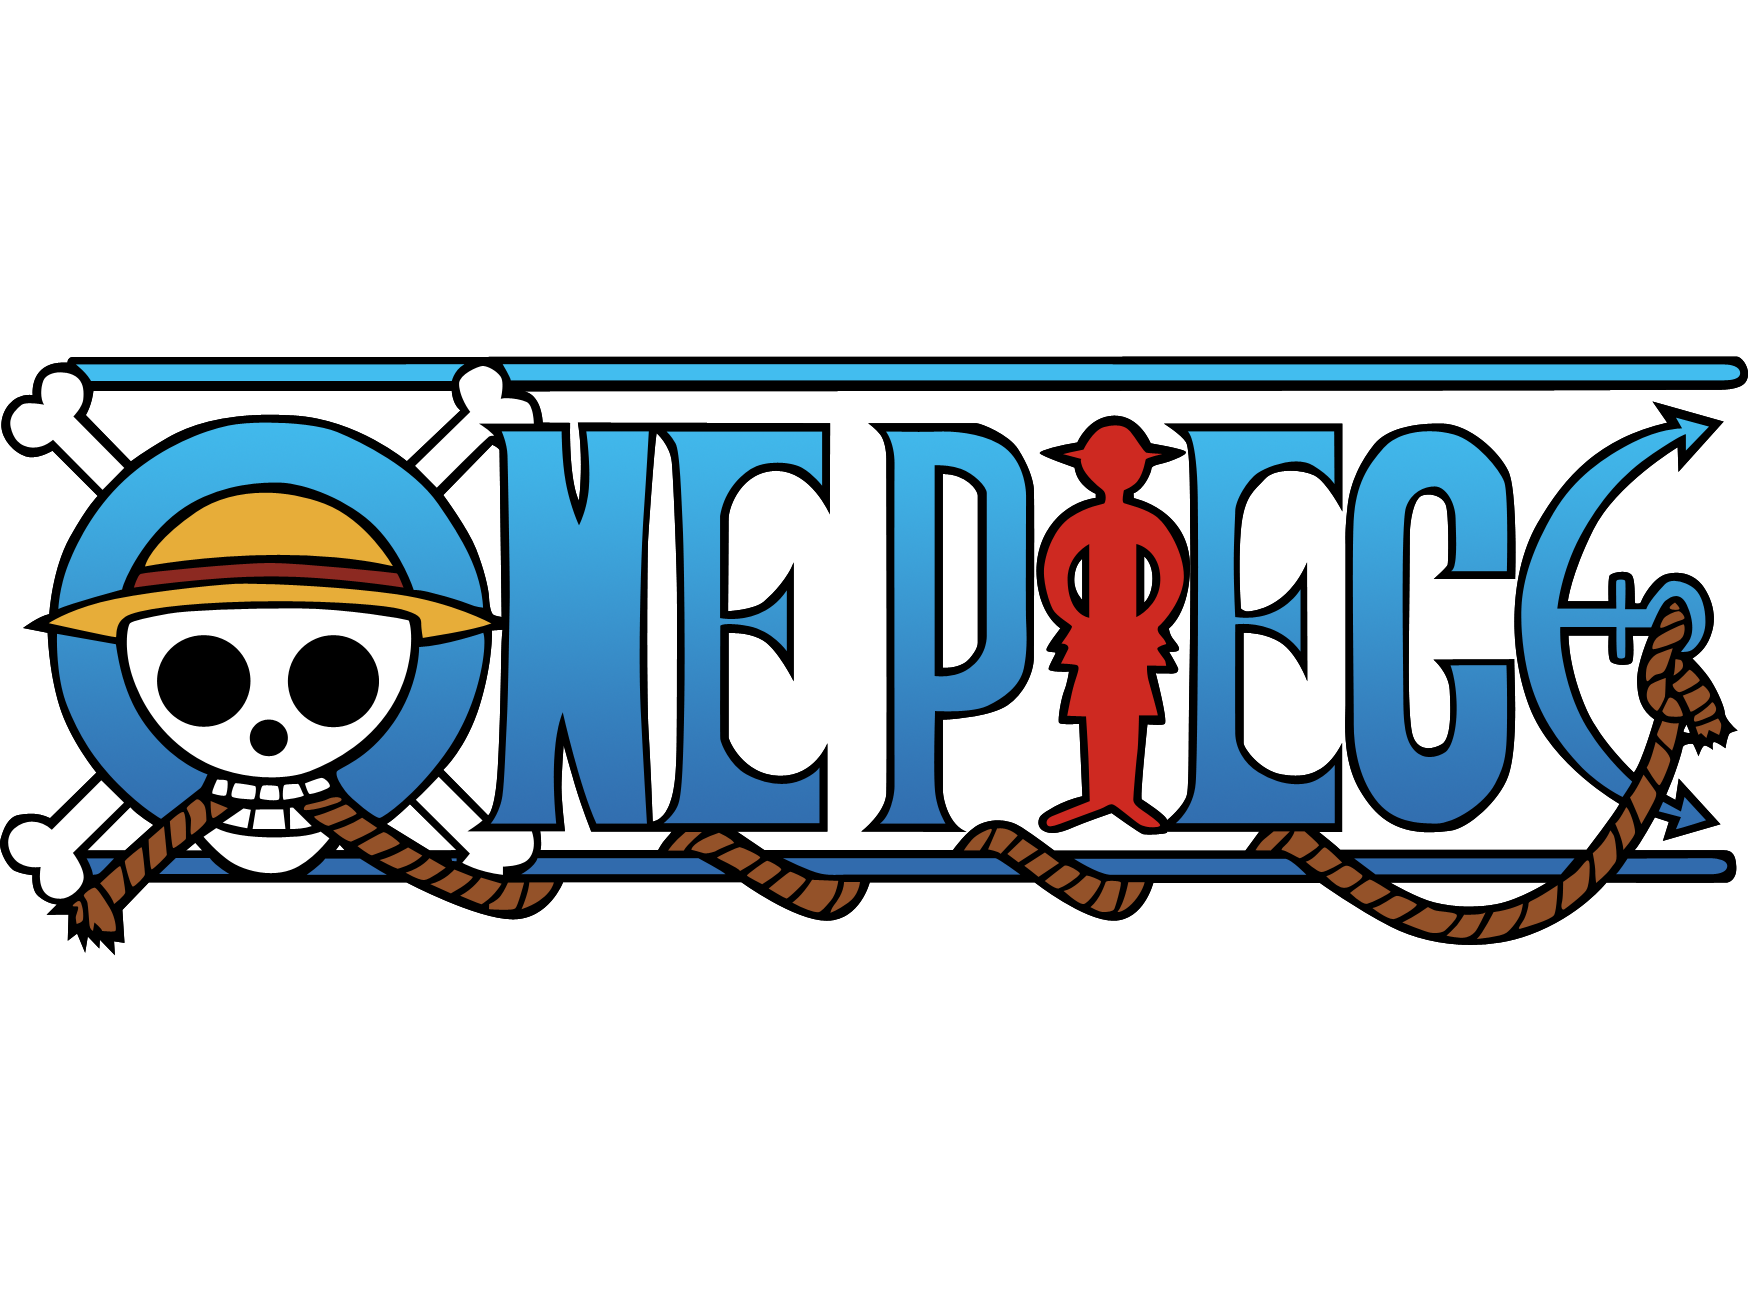 logo_one_piece_by_flash1710-d590080.png